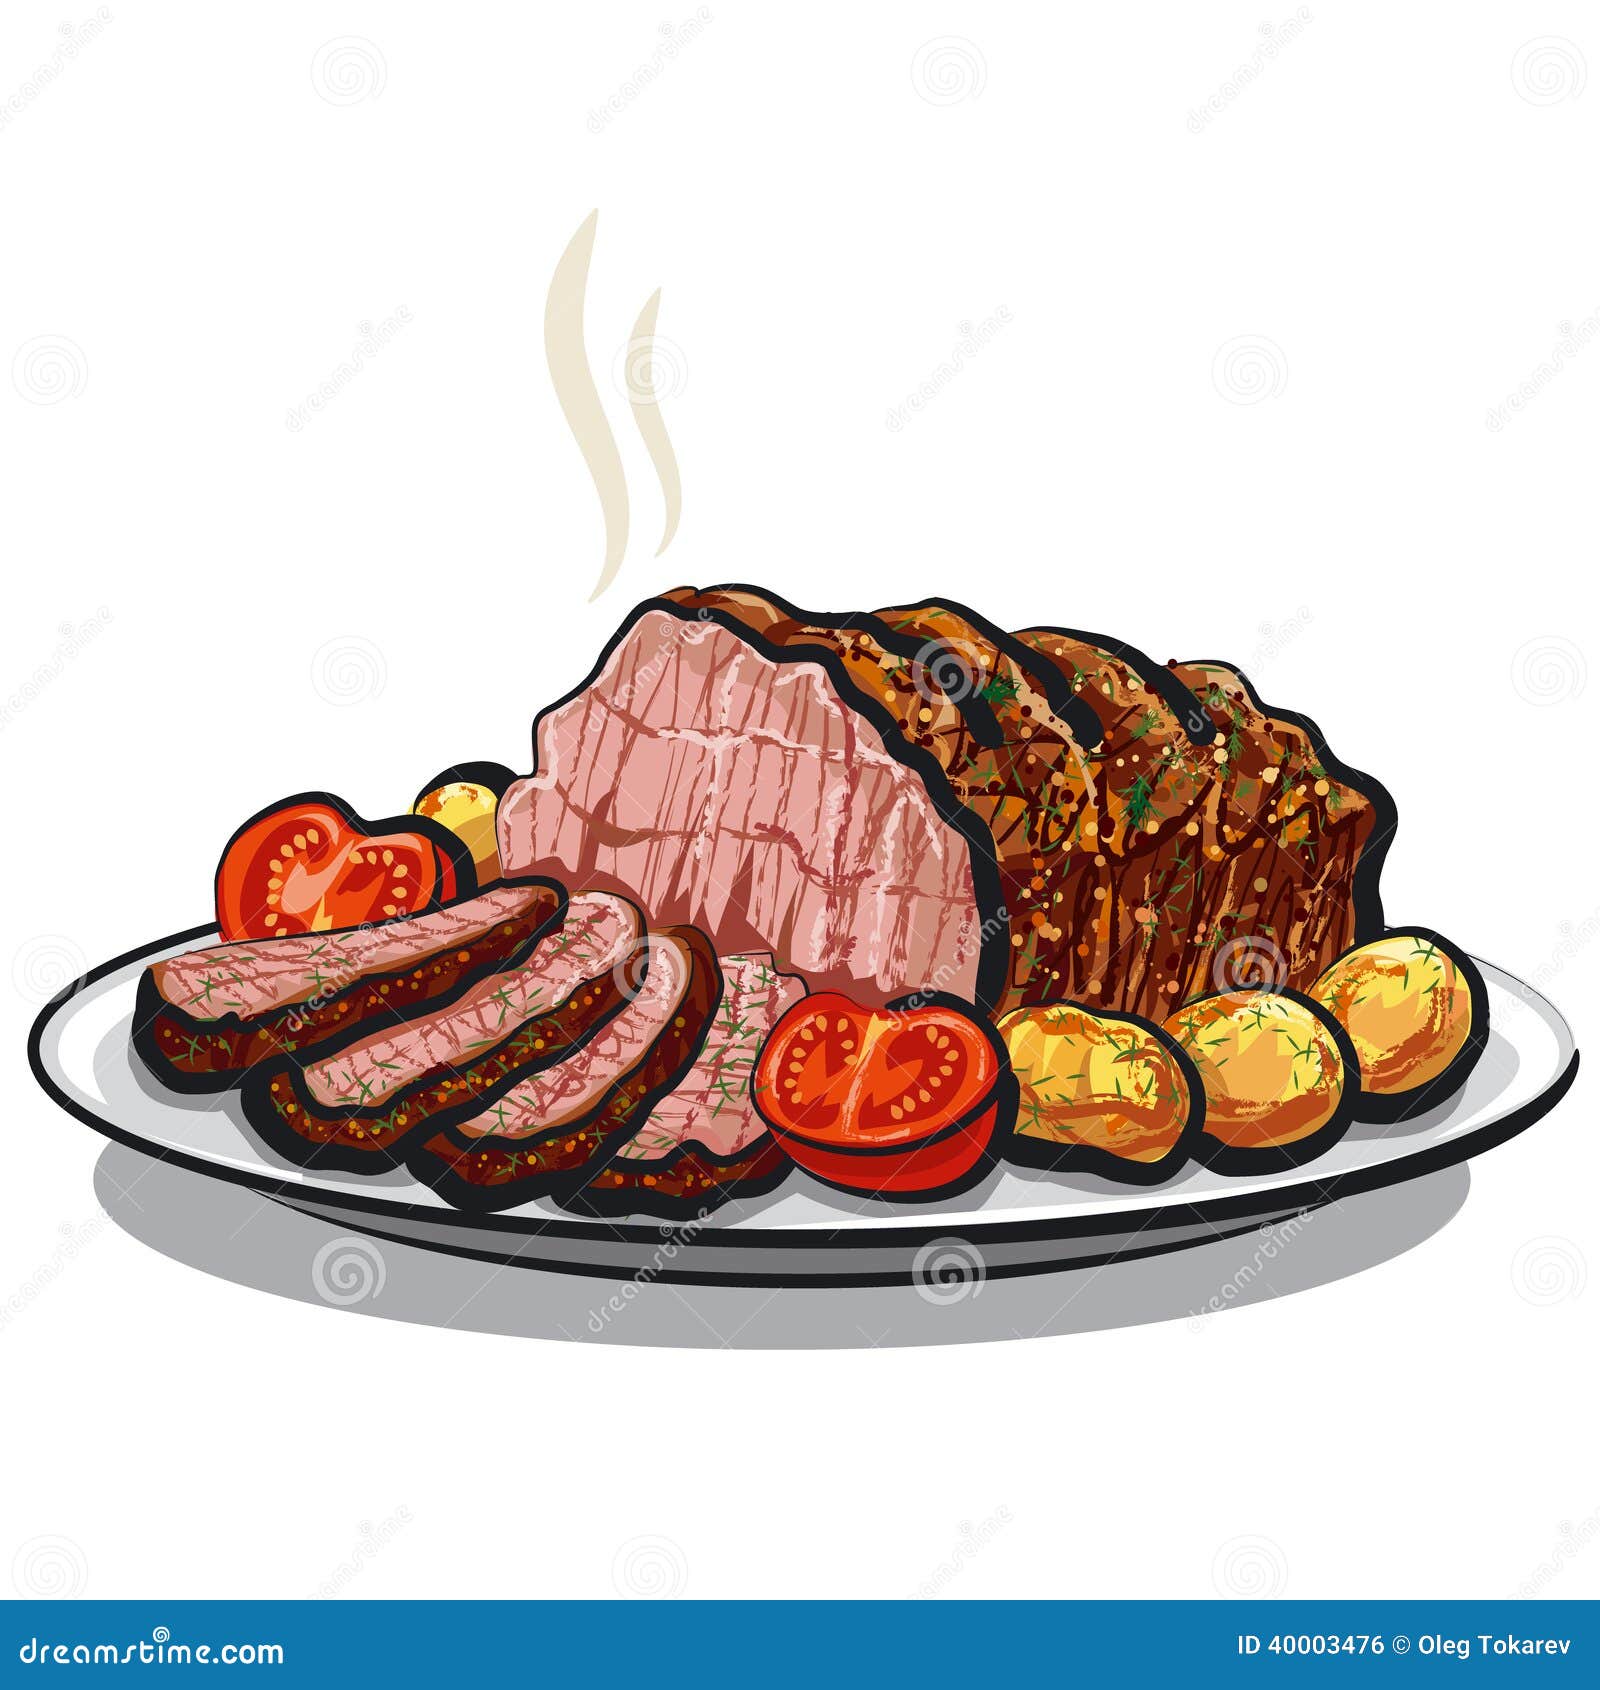 clipart beef - photo #25